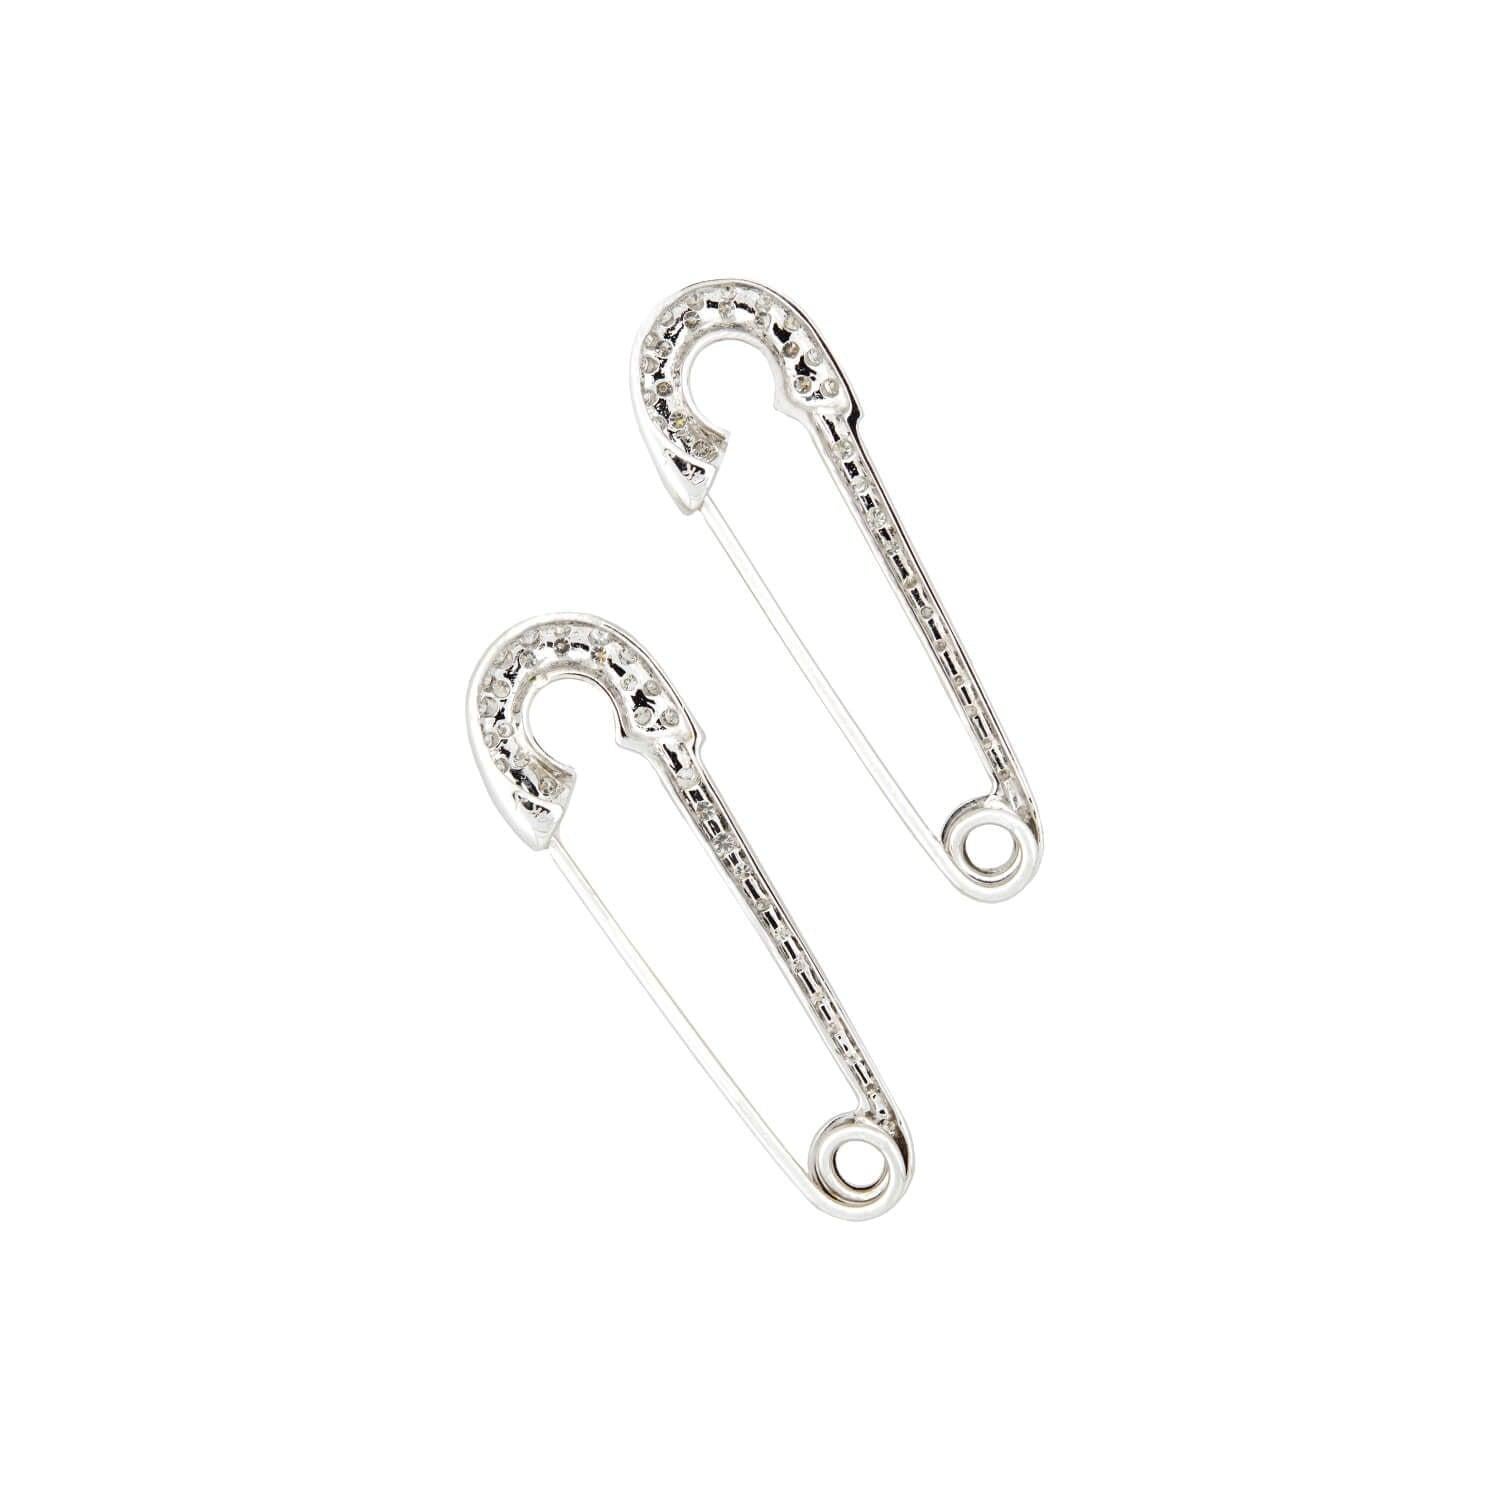 safety pin earrings meaning